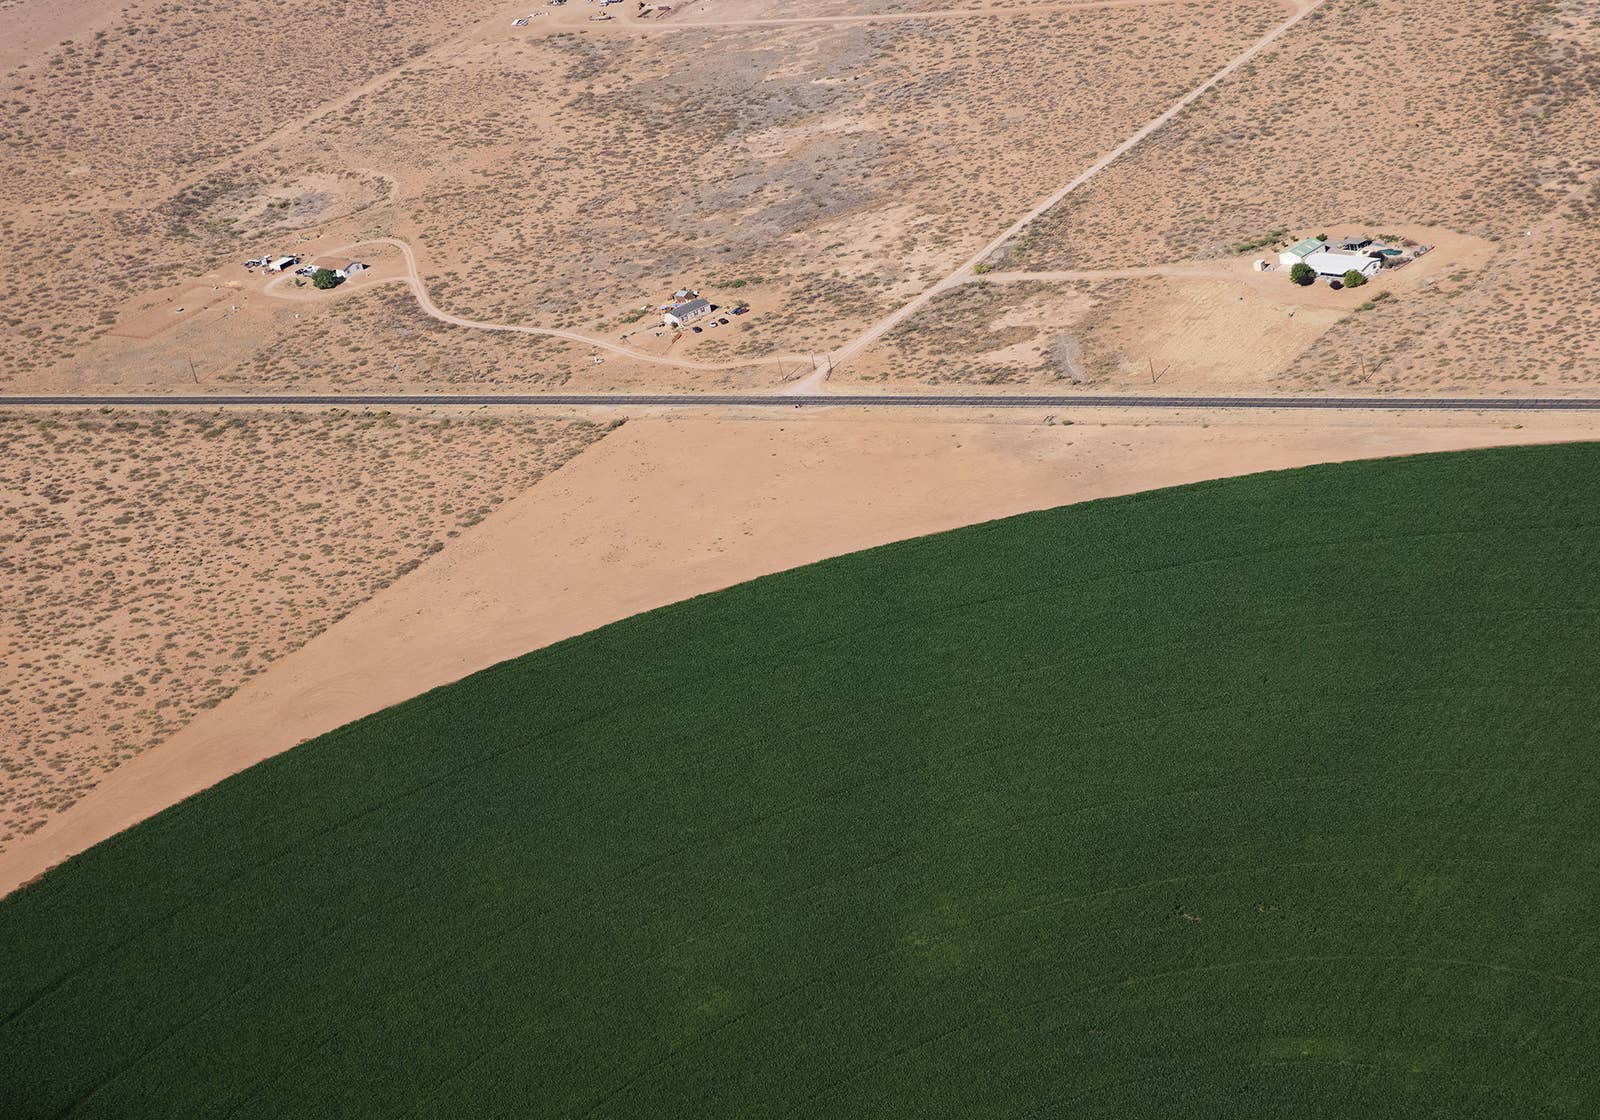 An irrigation circle green with vegetation edges up on a dry desert landscape